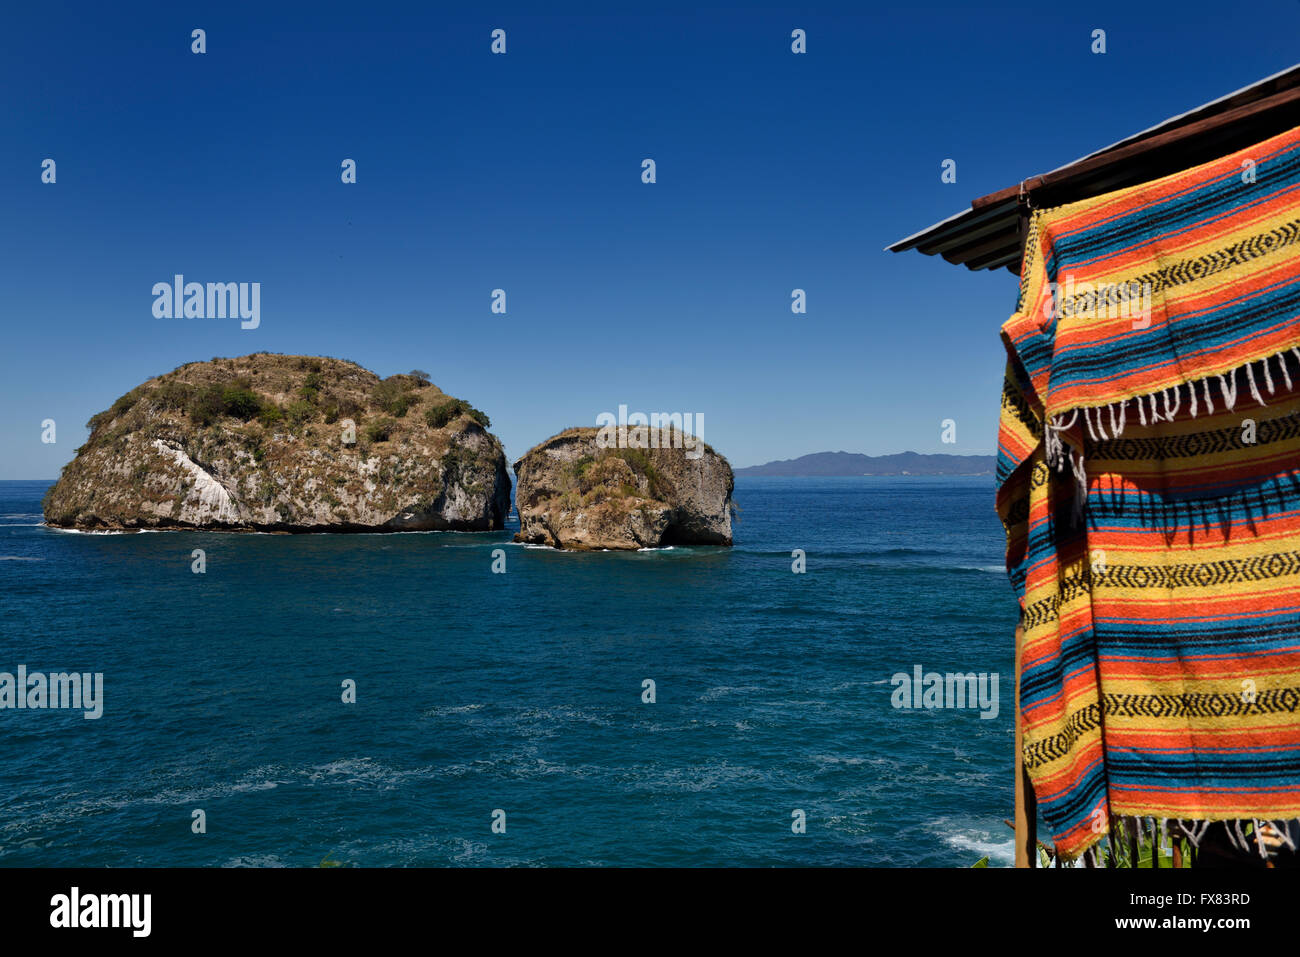 Los Arcos National Park Puerto Vallarta Mexico with locally made blanket on gift stall Stock Photo